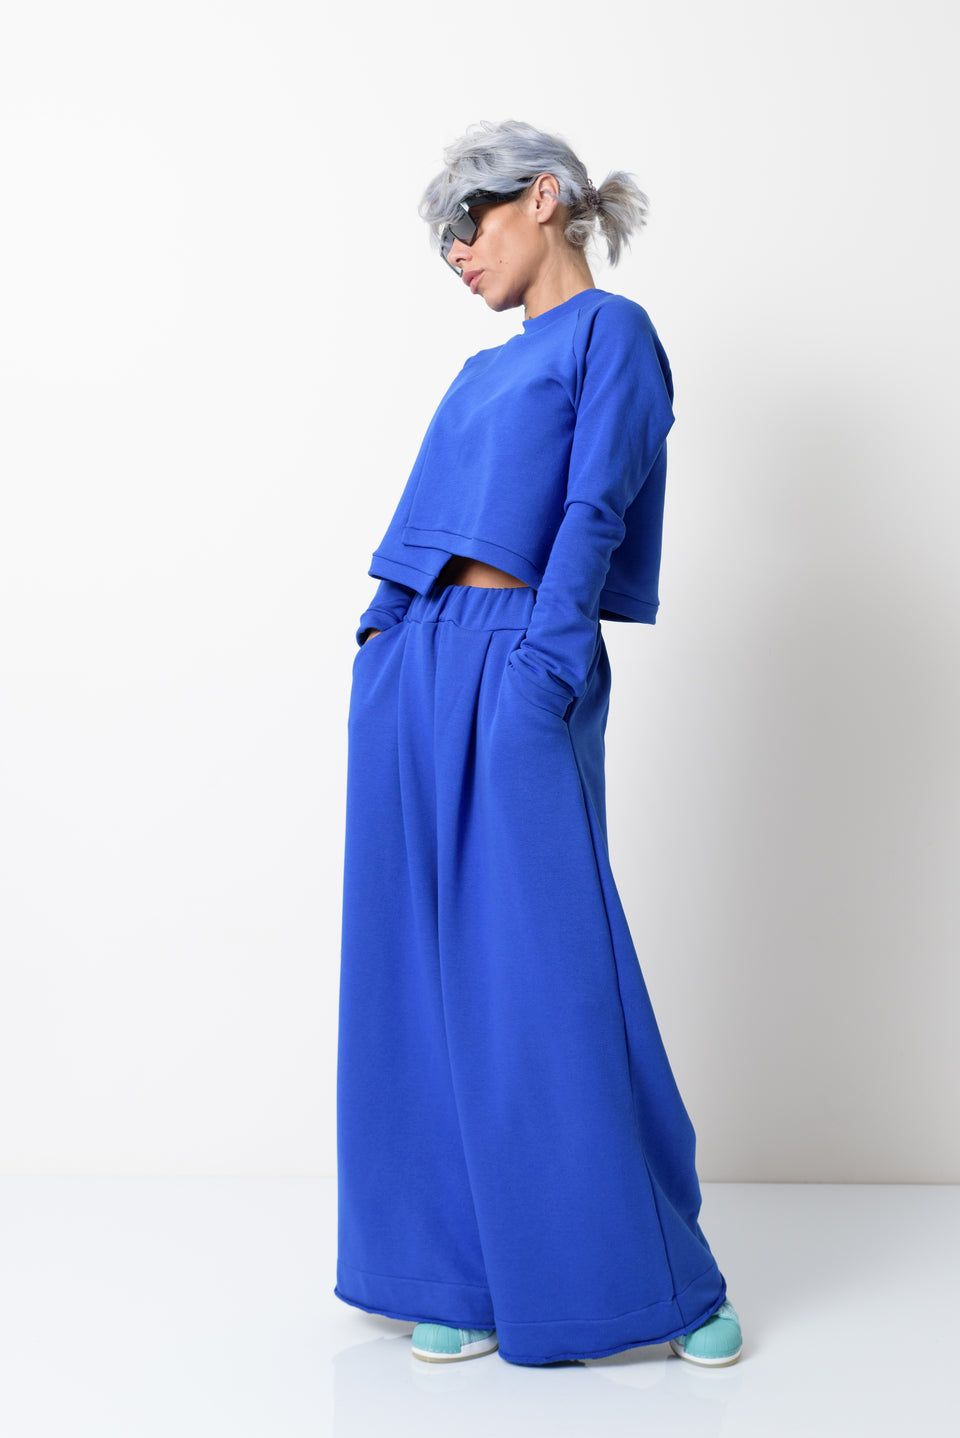 How to Wear Royal Blue for
  Women